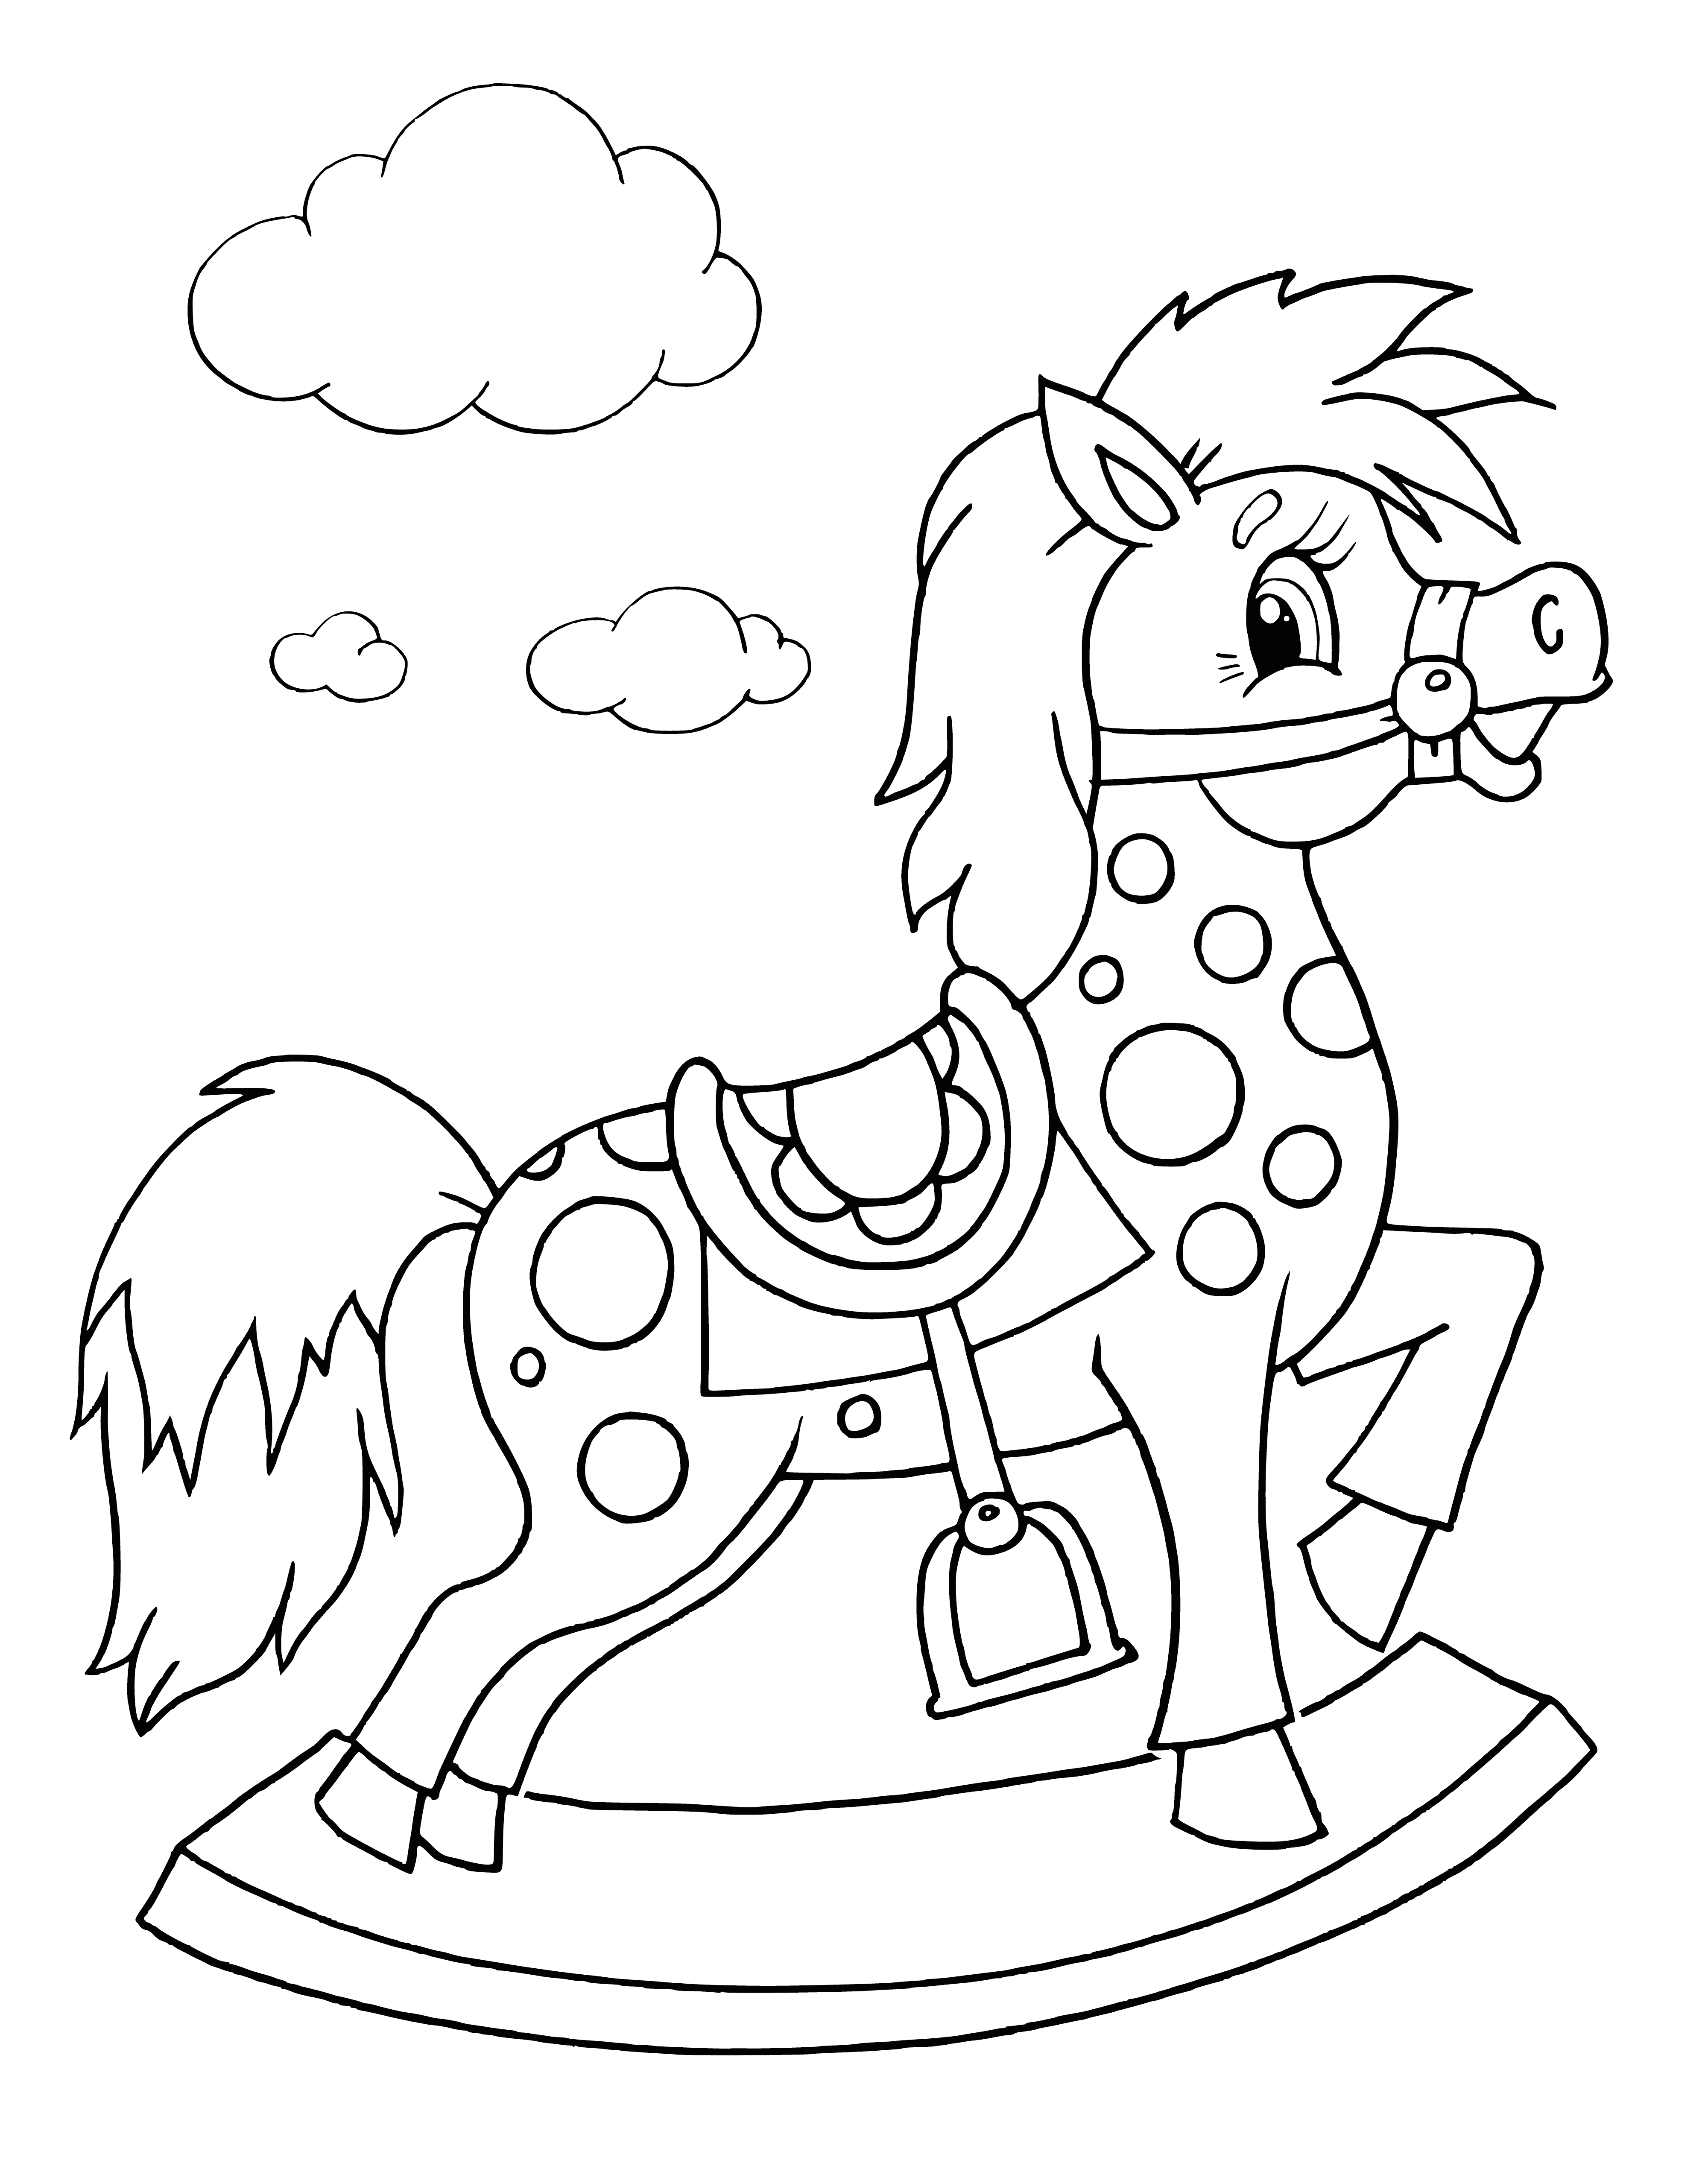 coloring page: Coloring page of a horse with a saddle, brown fur & long tail & mane, standing on four legs. #coloring